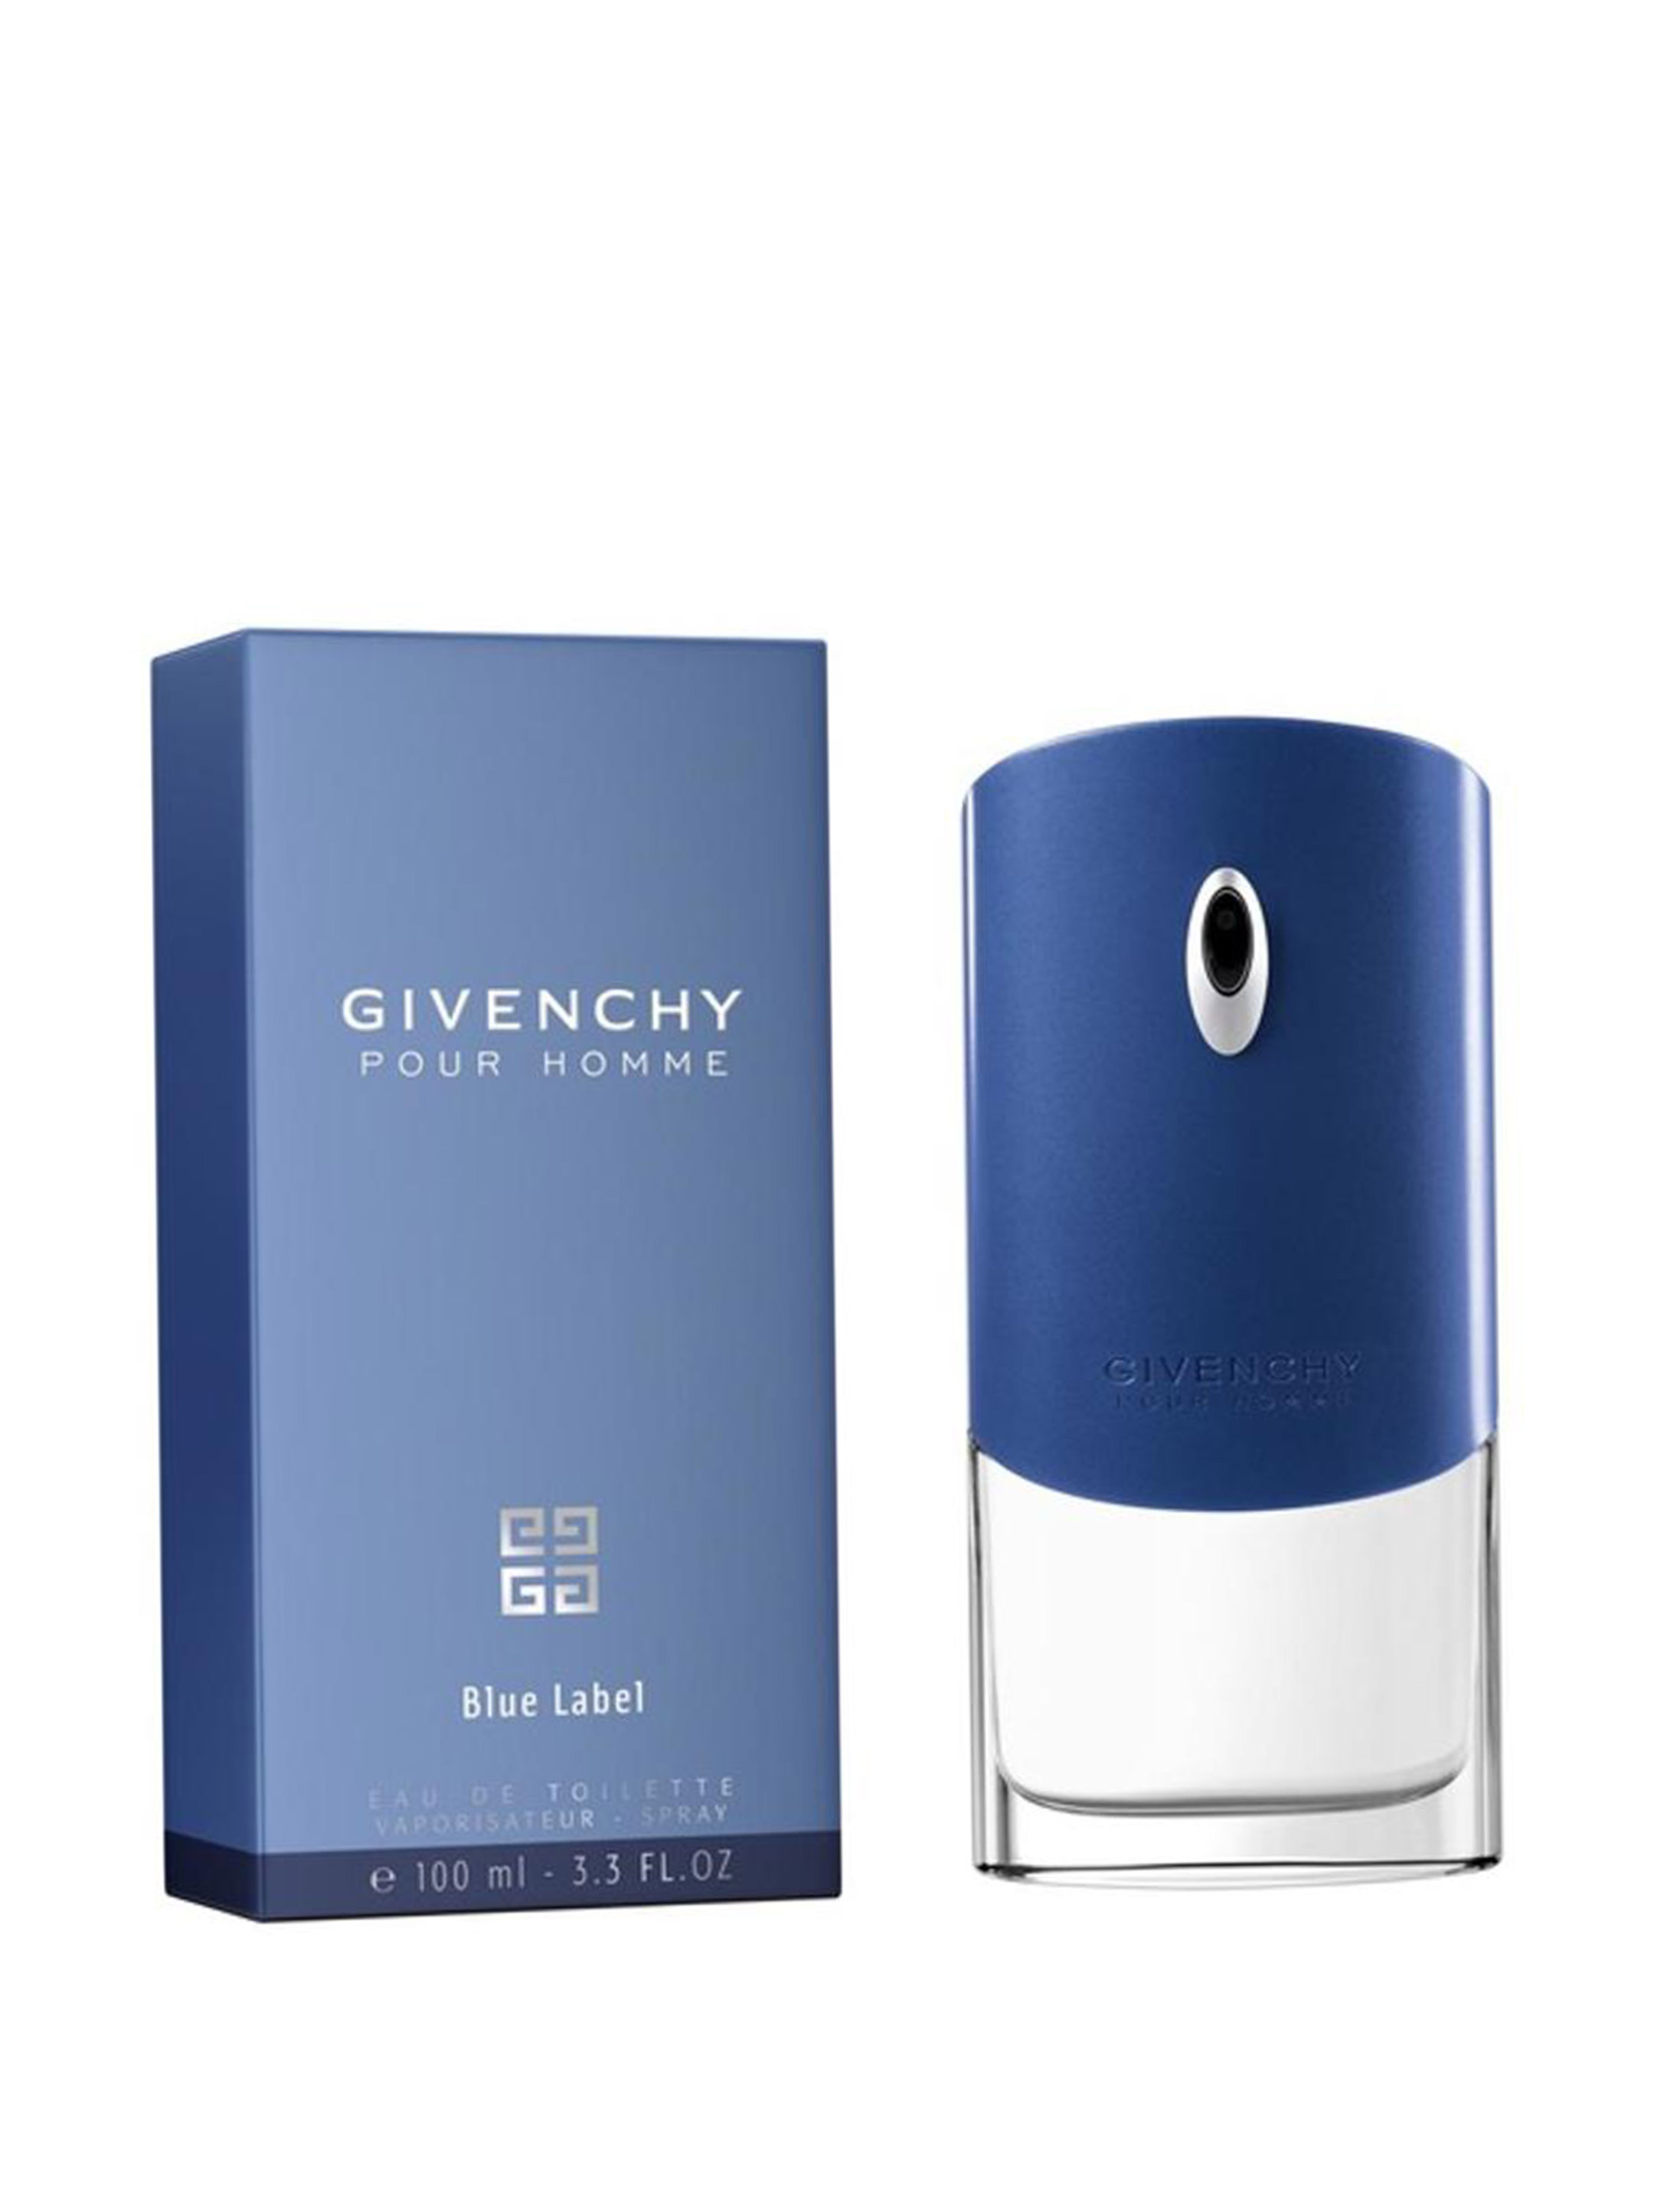 Givenchy pour homme оригинал. Givenchy Blue Label 100ml. Givenchy "pour homme" EDT, 100ml. Живанши Блю мужские духи. Givenchy pour homme туалетная вода 100 мл.